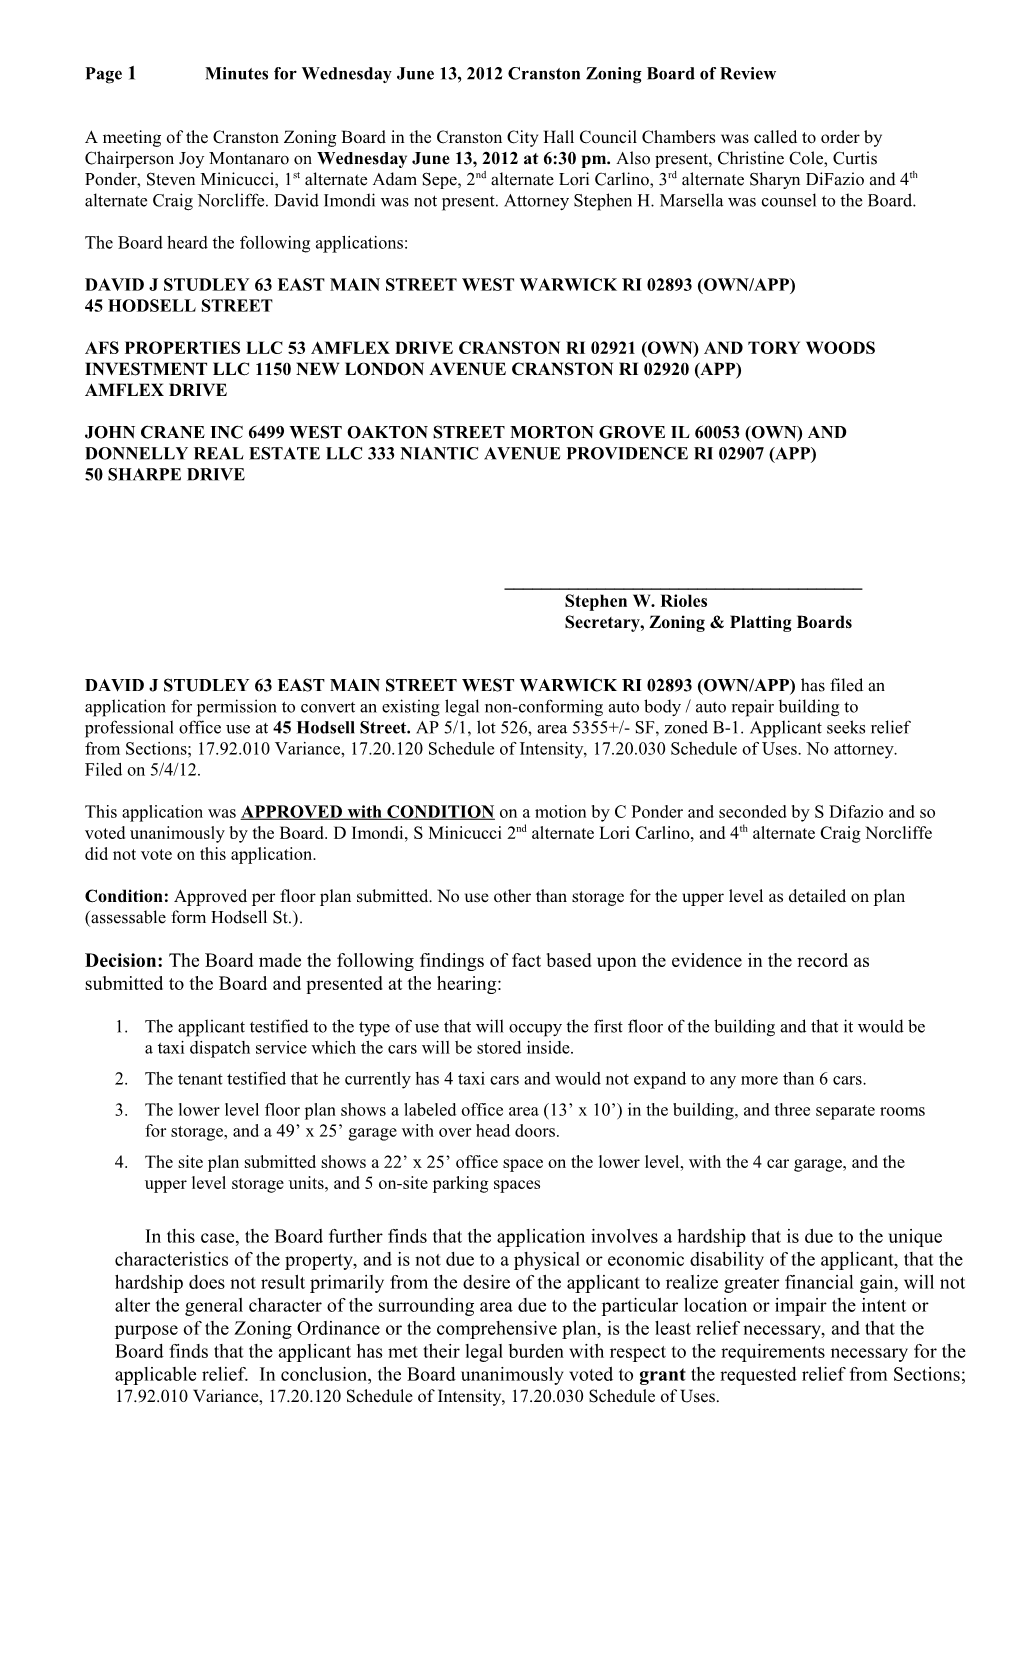 Page 1Minutes for Wednesday June 13, 2012Cranston Zoning Board of Review